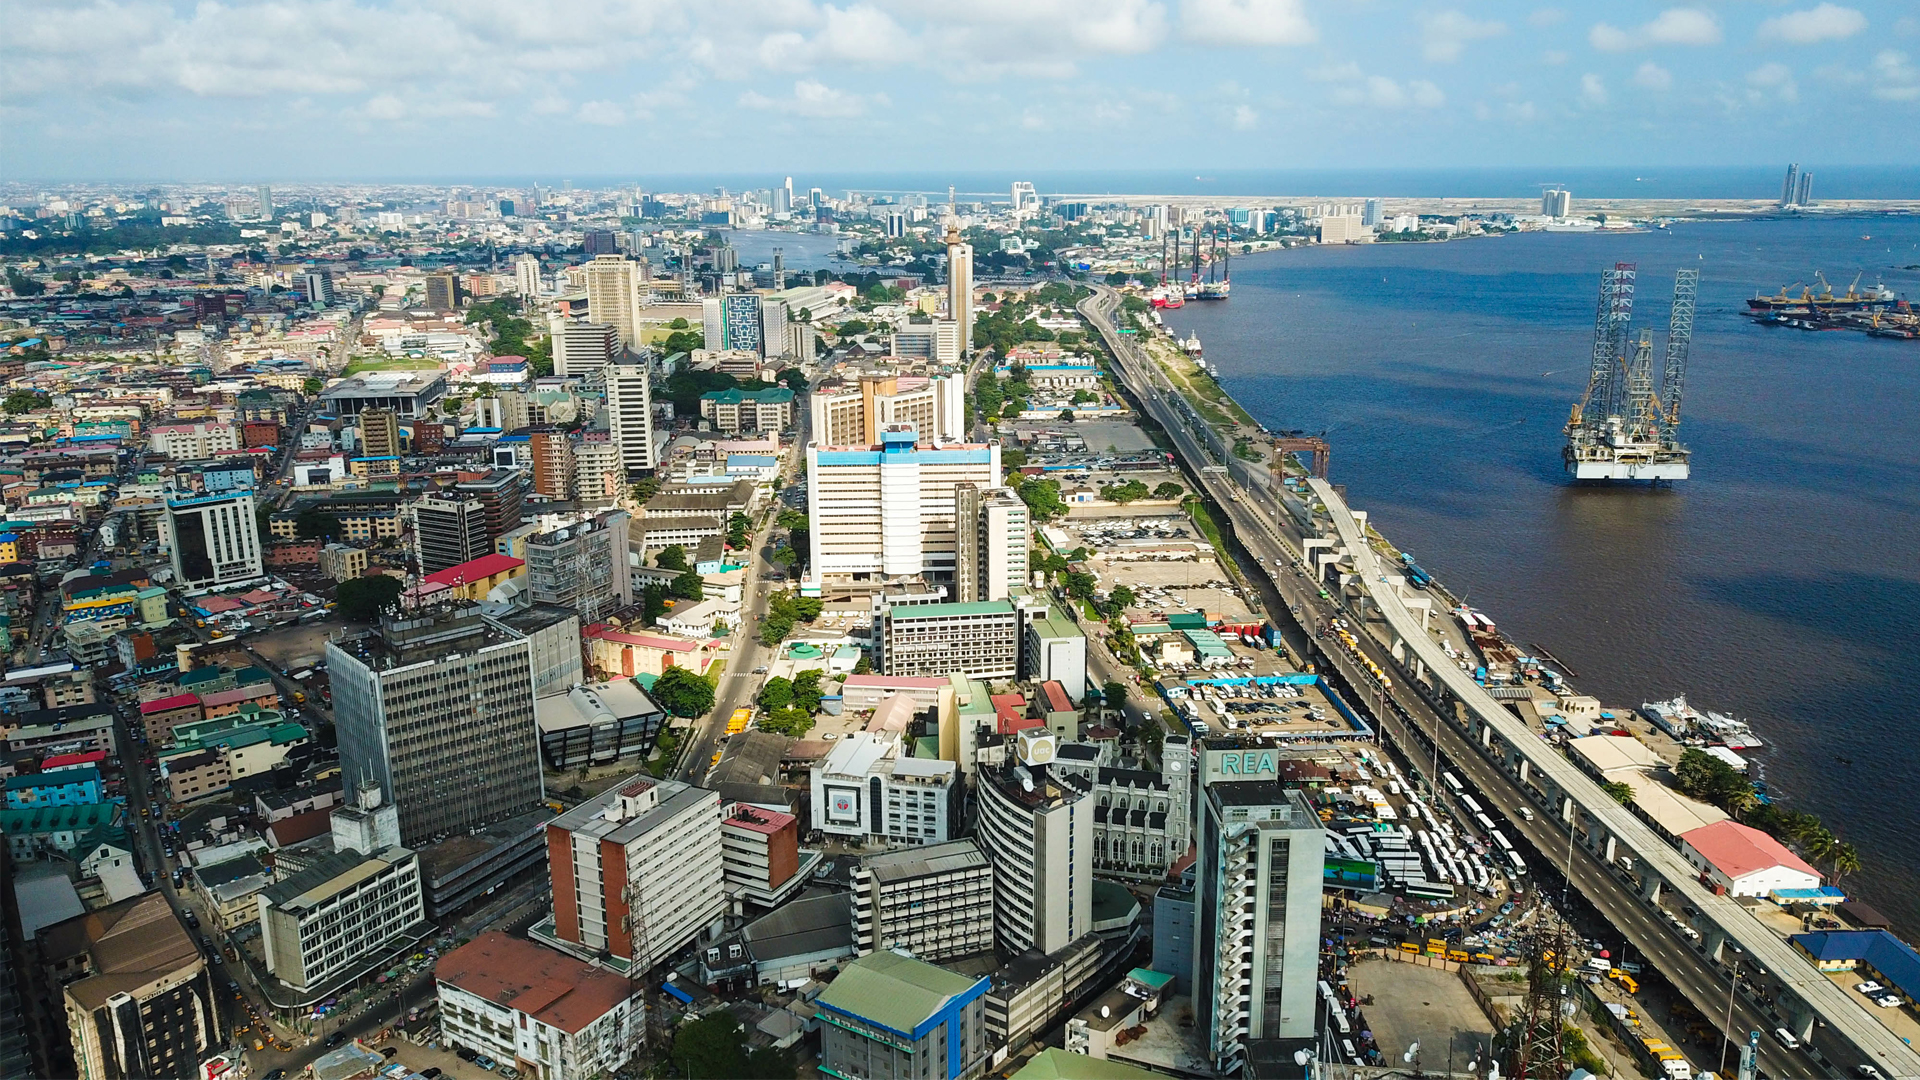 Marina Commercial Business District Lagos Island Nigeria Image for Hero Box